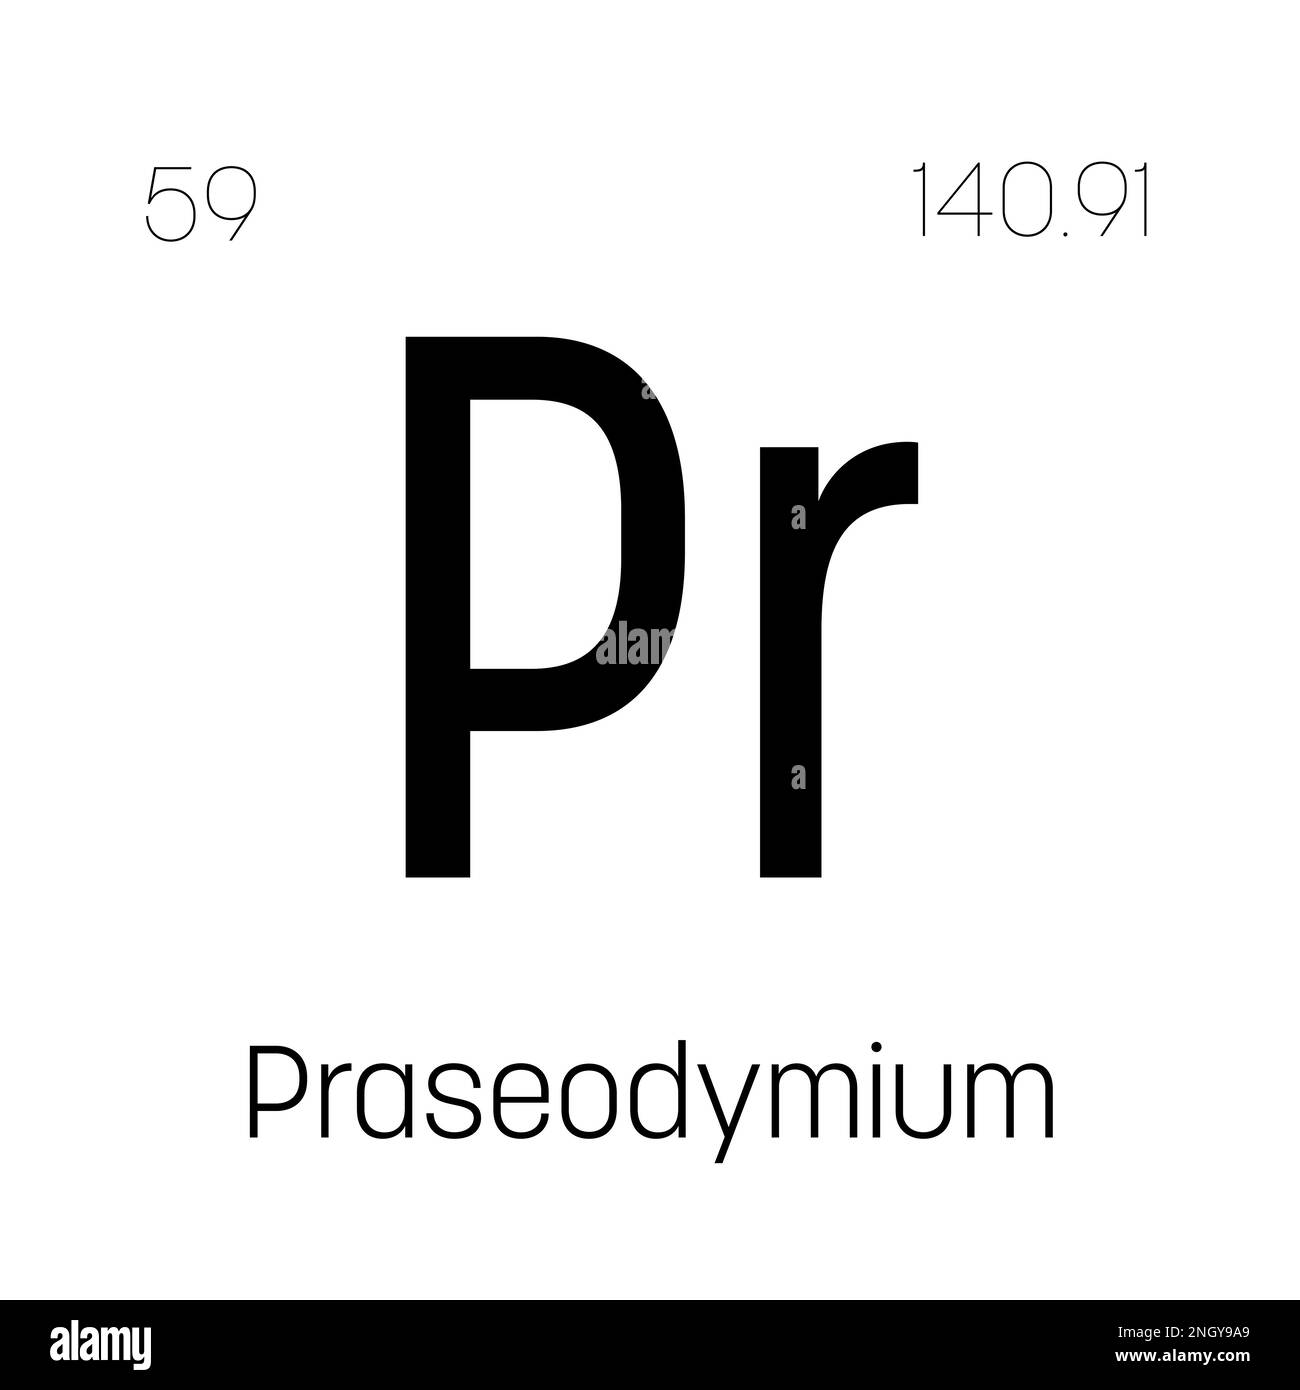 Praseodymium, Pr, periodic table element with name, symbol, atomic number and weight. Rare earth metal with various industrial uses, such as in magnets, lasers, and as a component in certain types of glass. Stock Vector